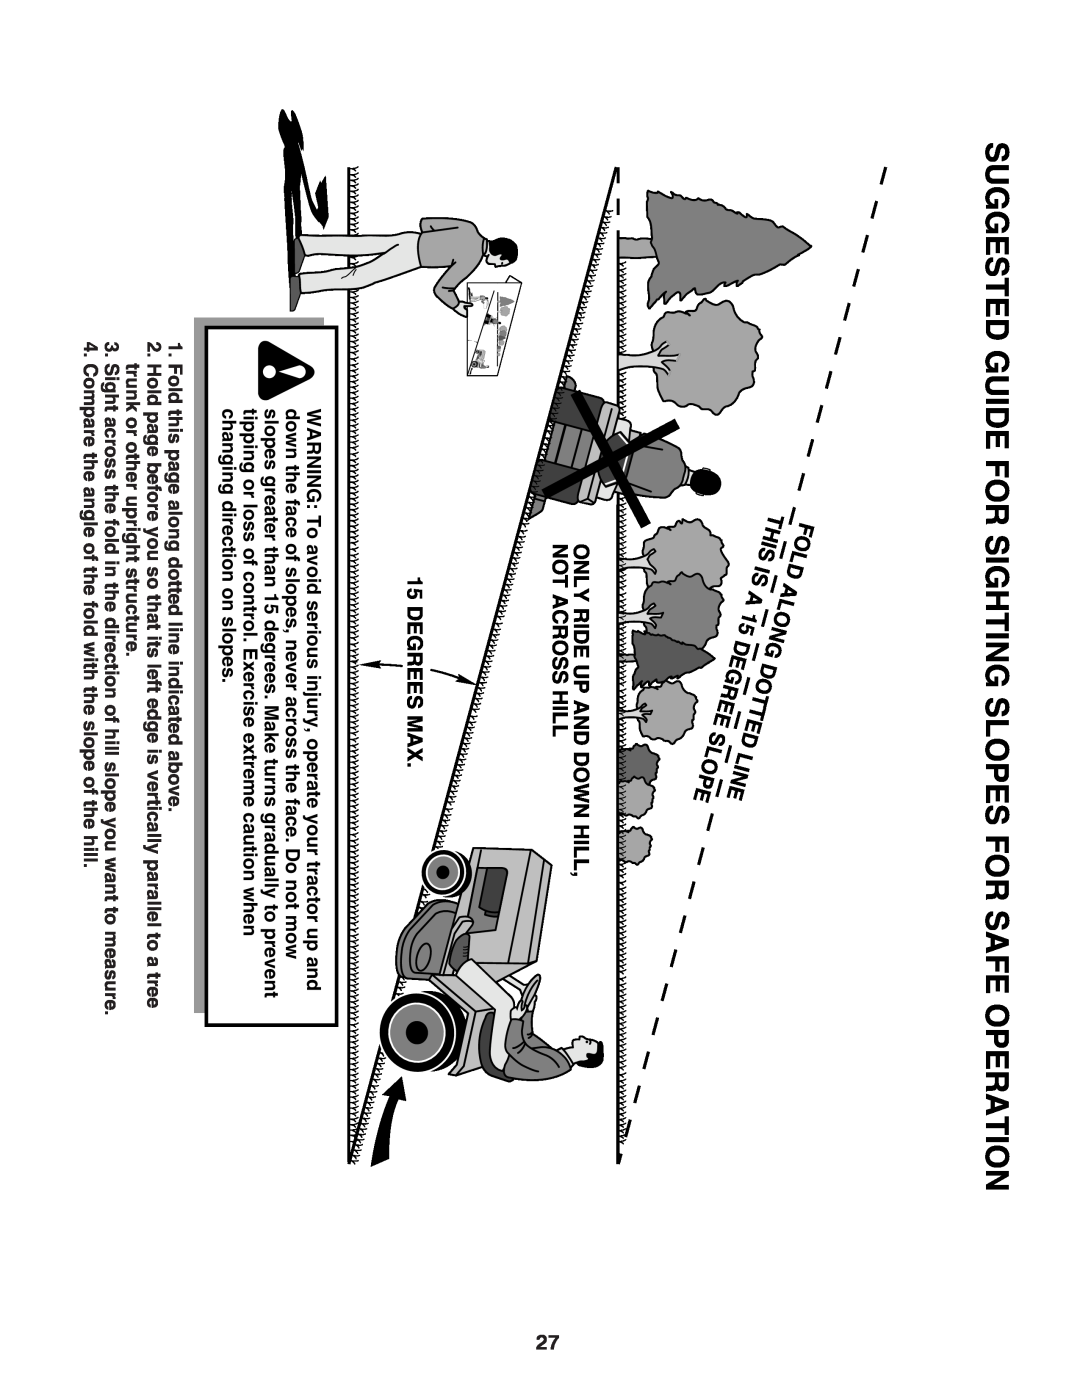 McCulloch 96041018001 manual Suggested Guide For Sighting Slopes For Safe Operation 